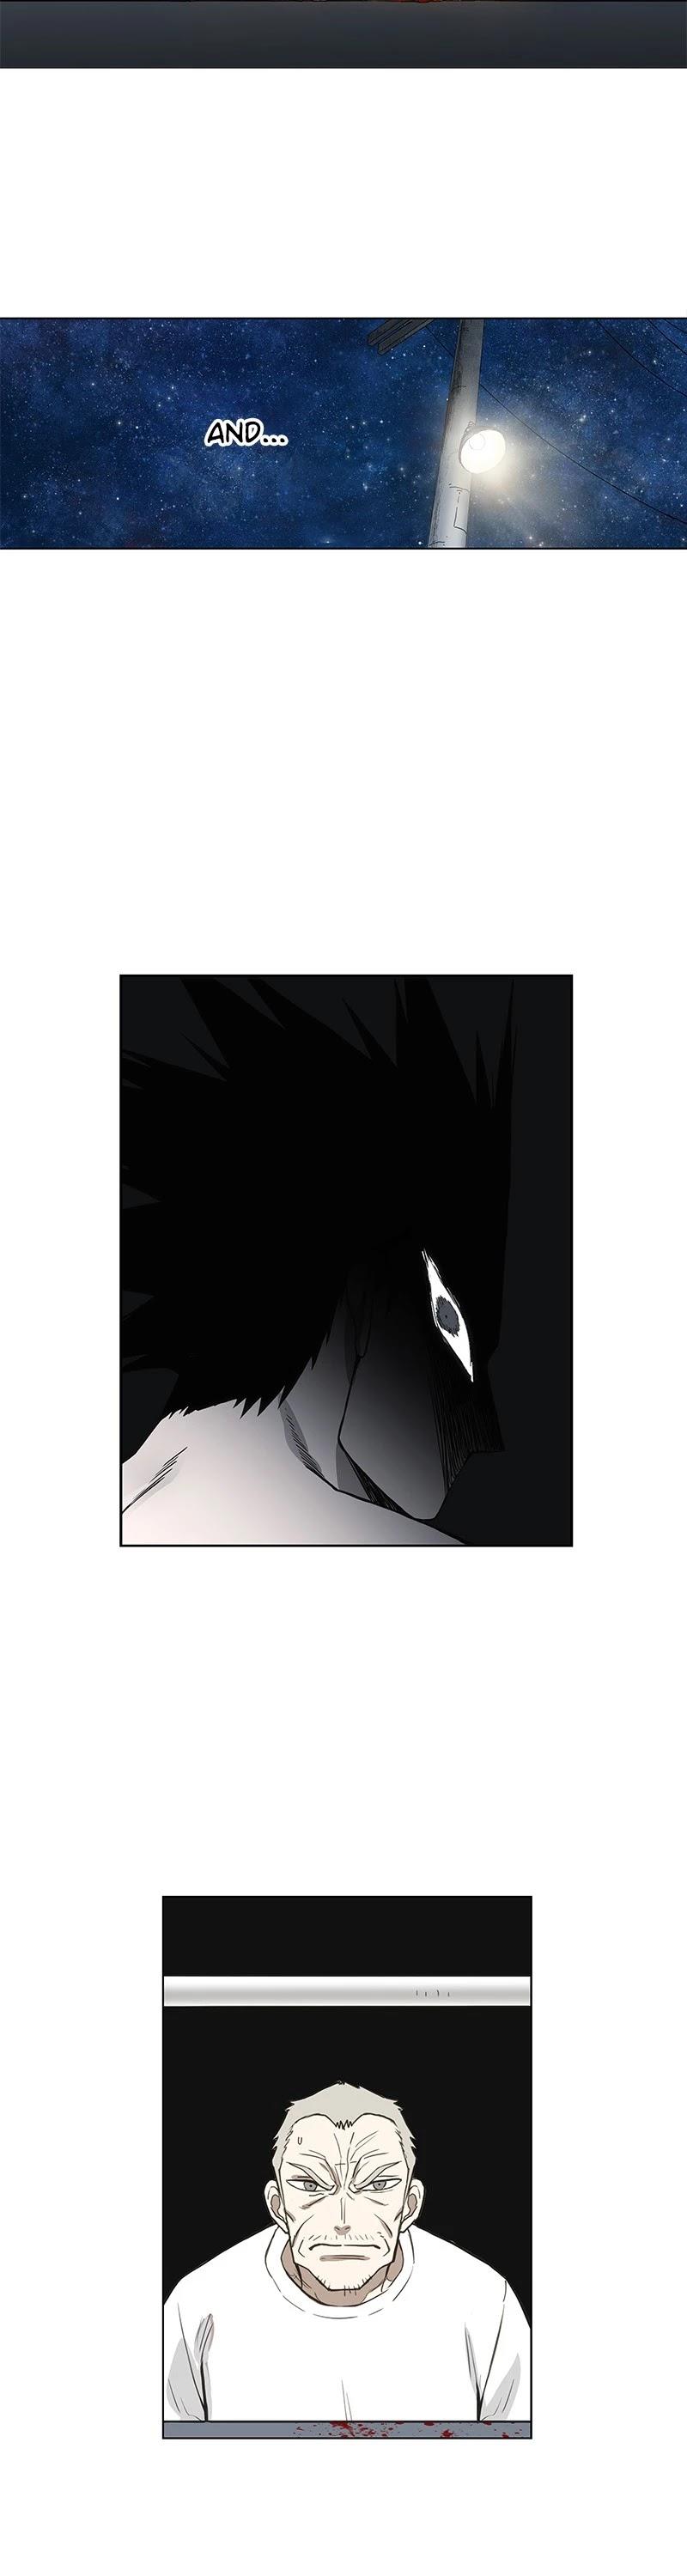 The Boxer Chapter 112: Ep. 102 - Light (3) page 33 - 